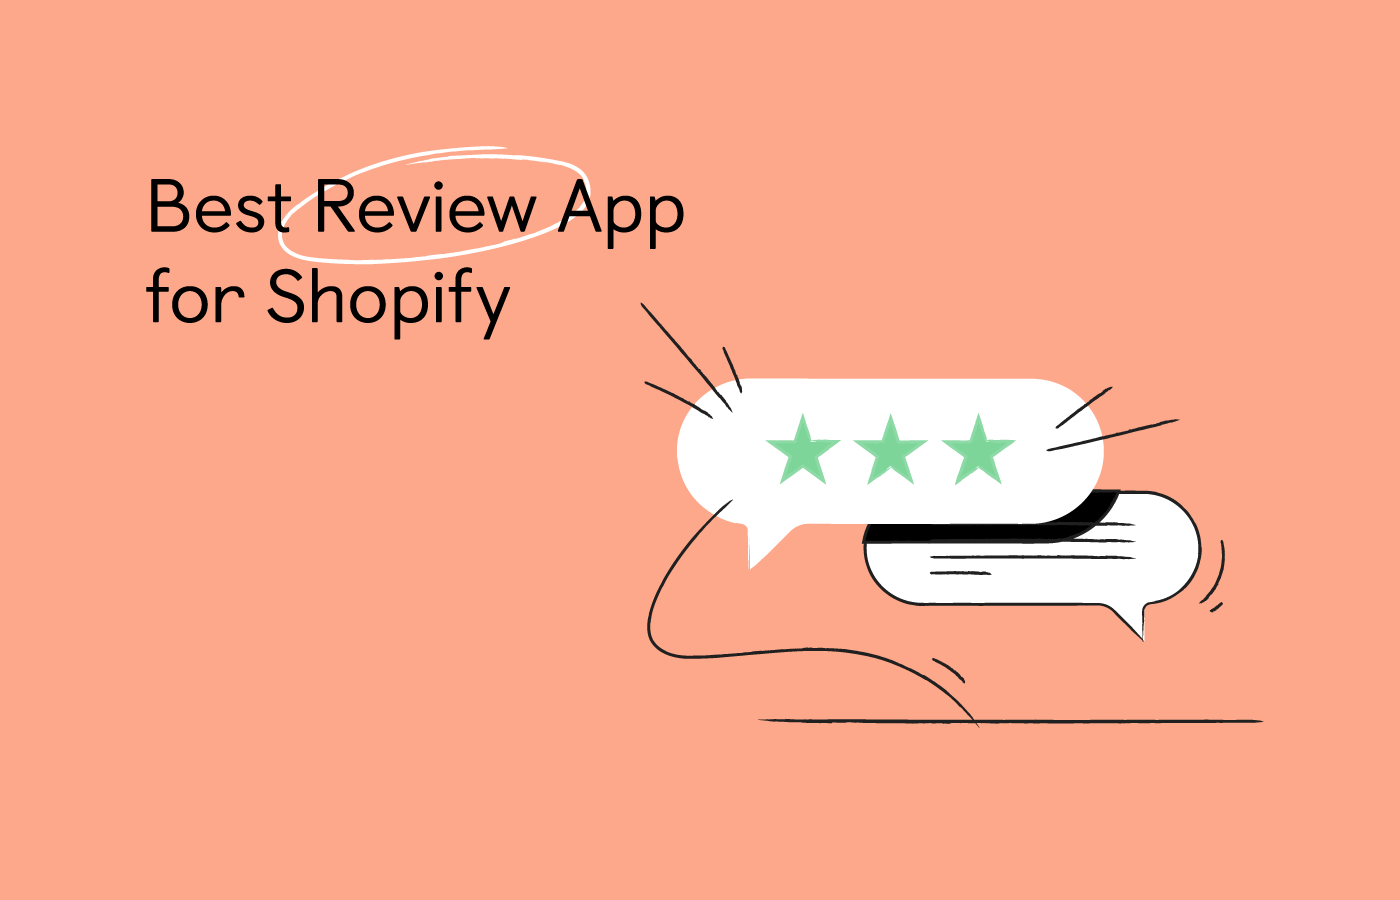 Best Review App for Shopify: 10+ Top-Rated Options [Updated 2021]